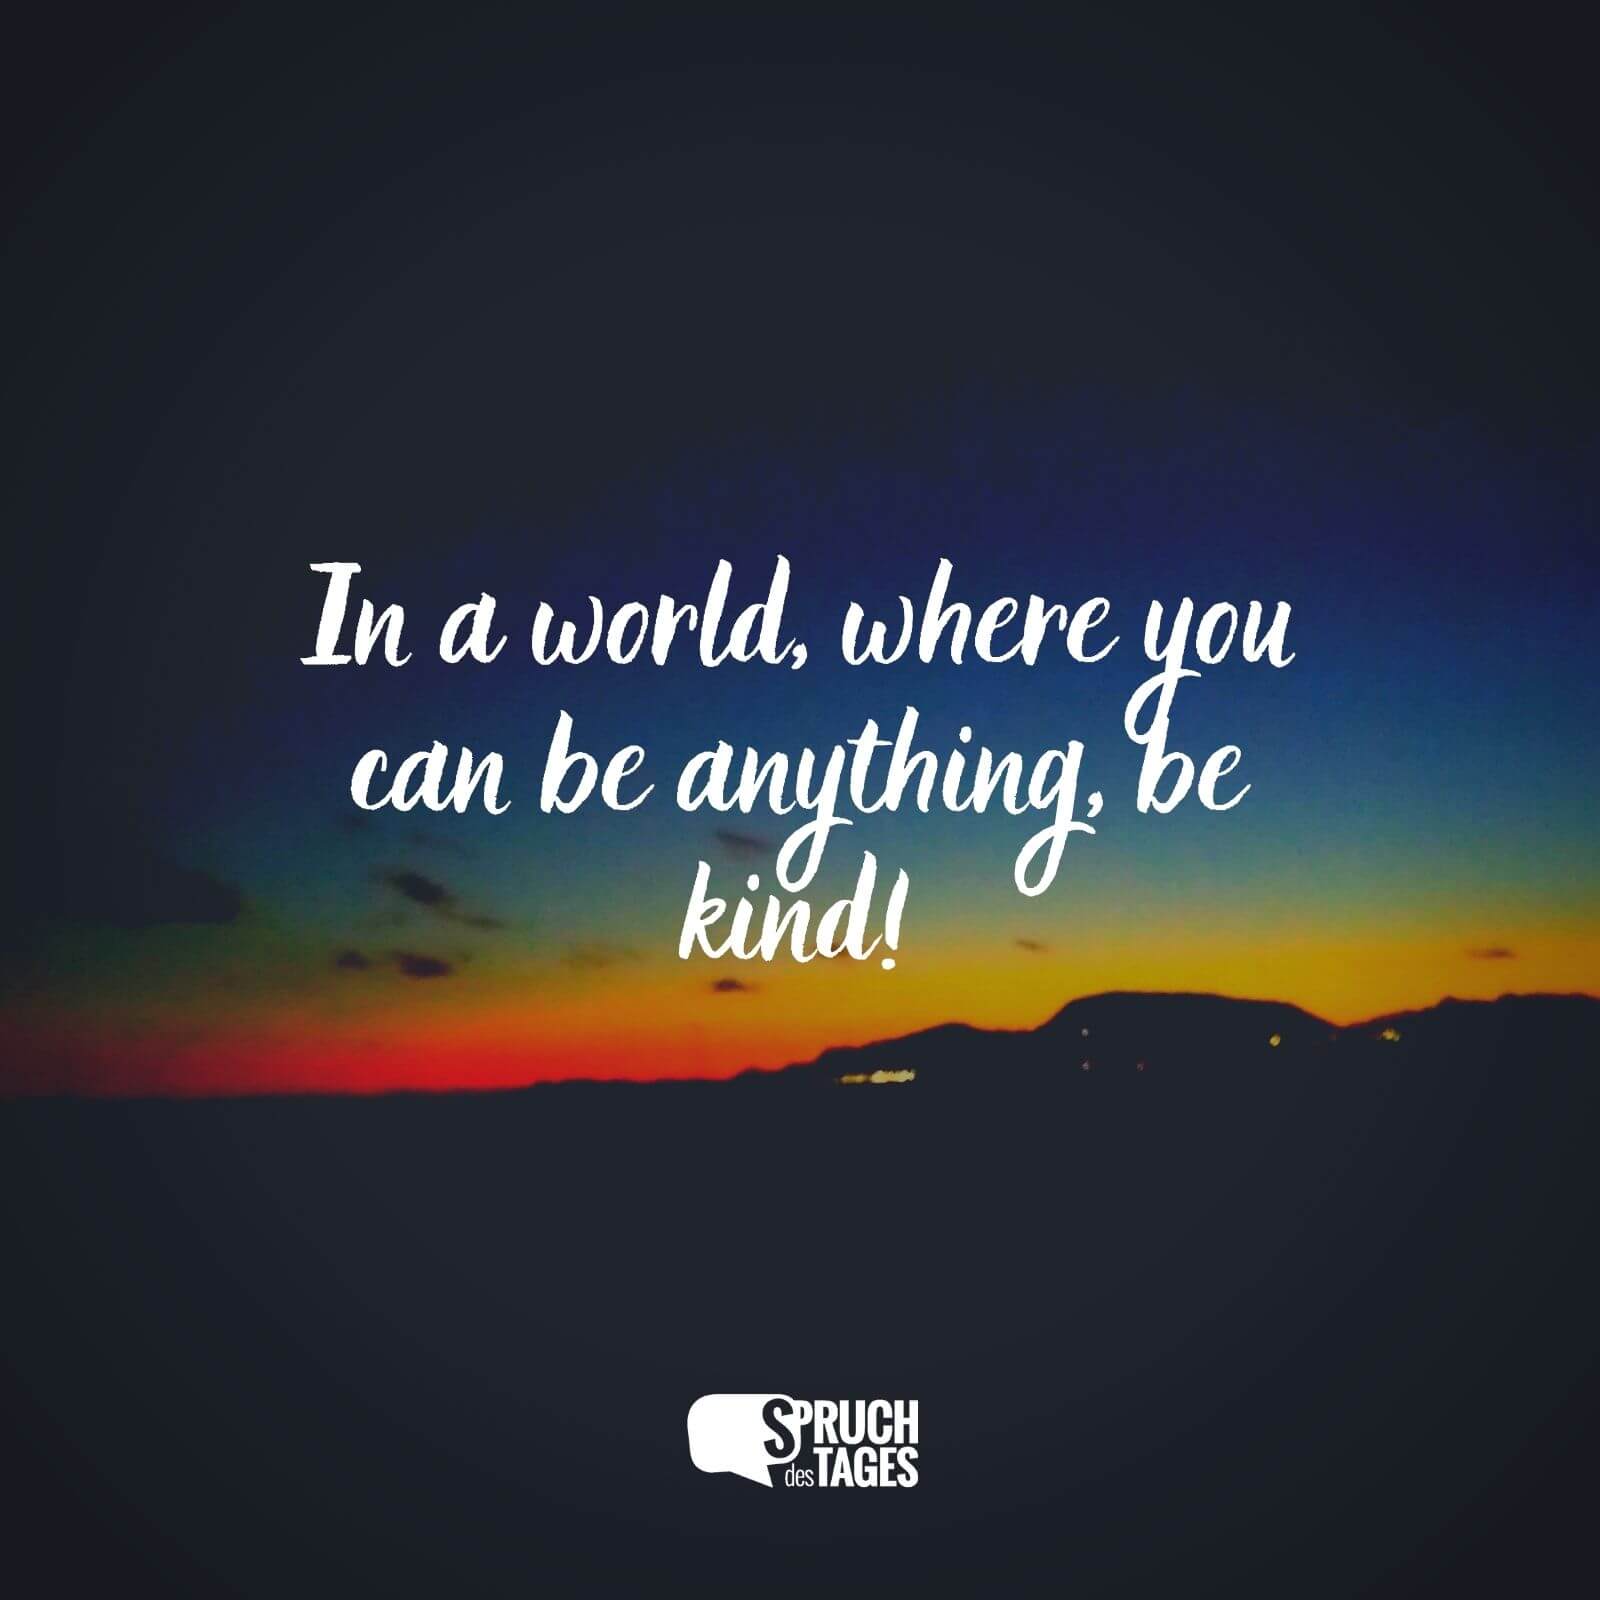 In a world, where you can be anything, be kind!